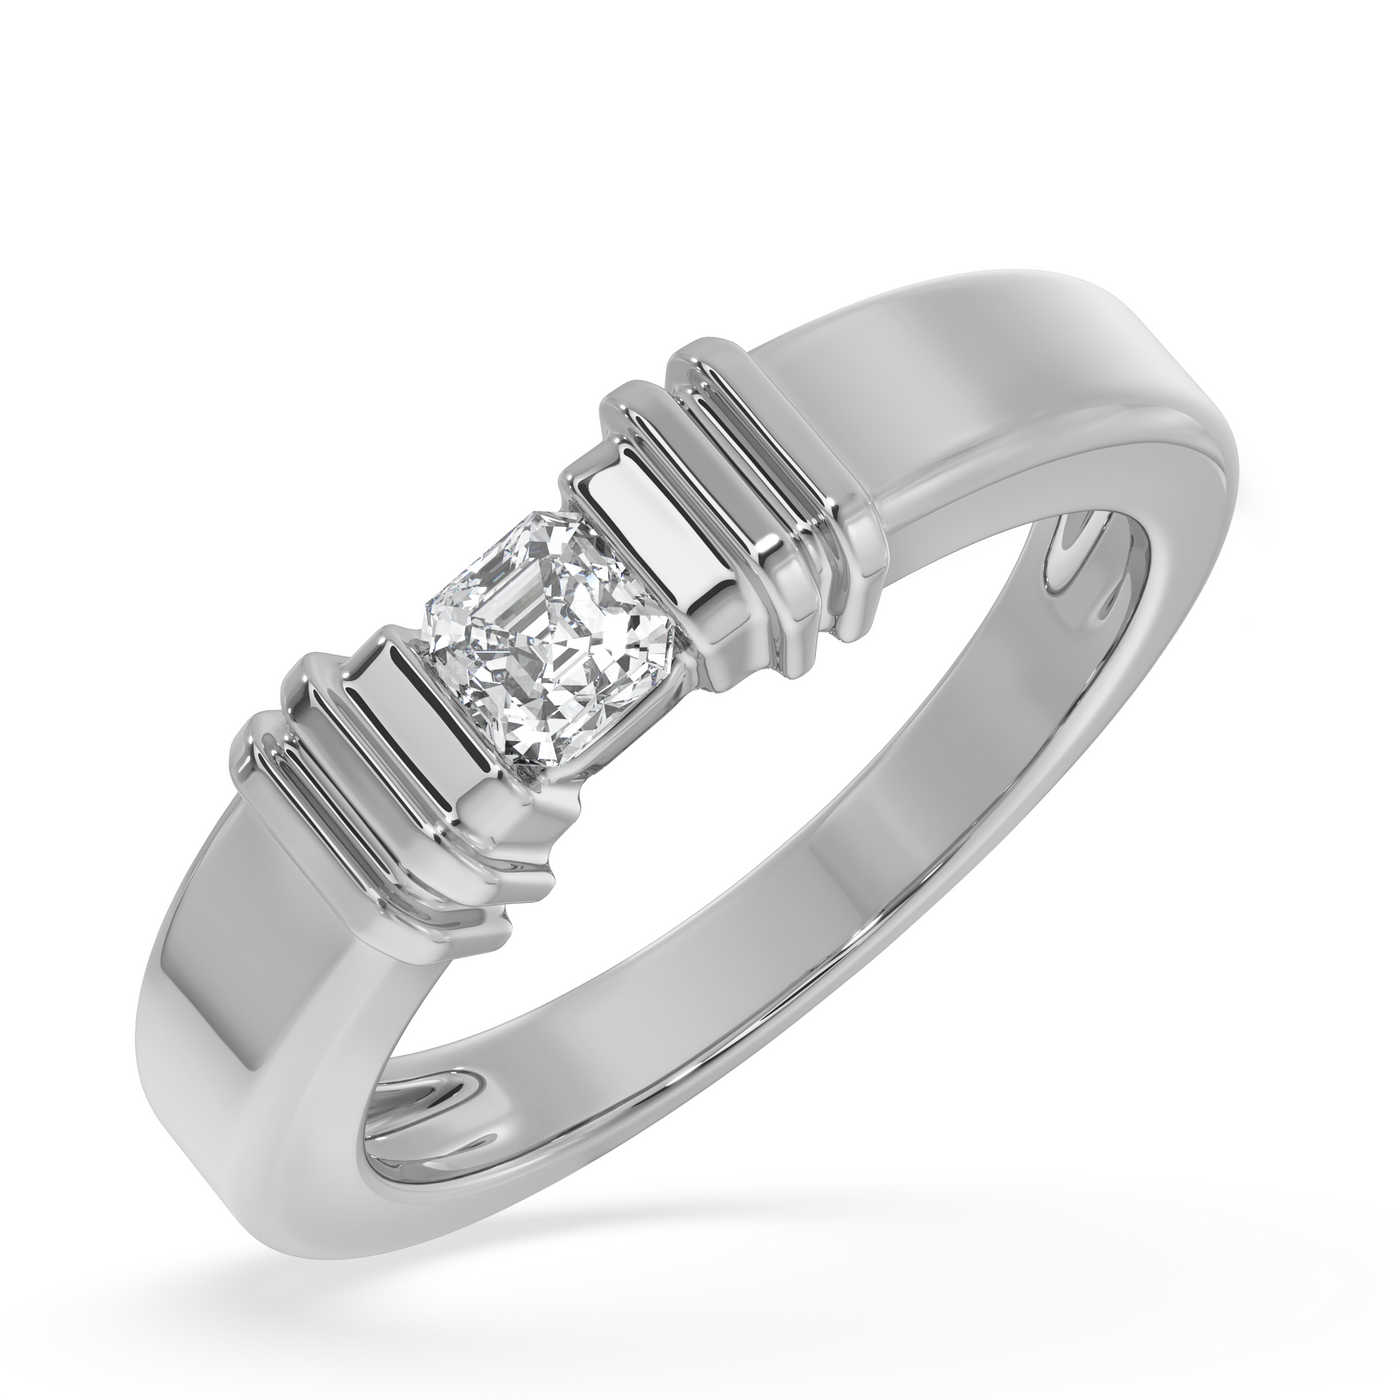 SY Men's Ring in Platinum,  Princess Solitaire